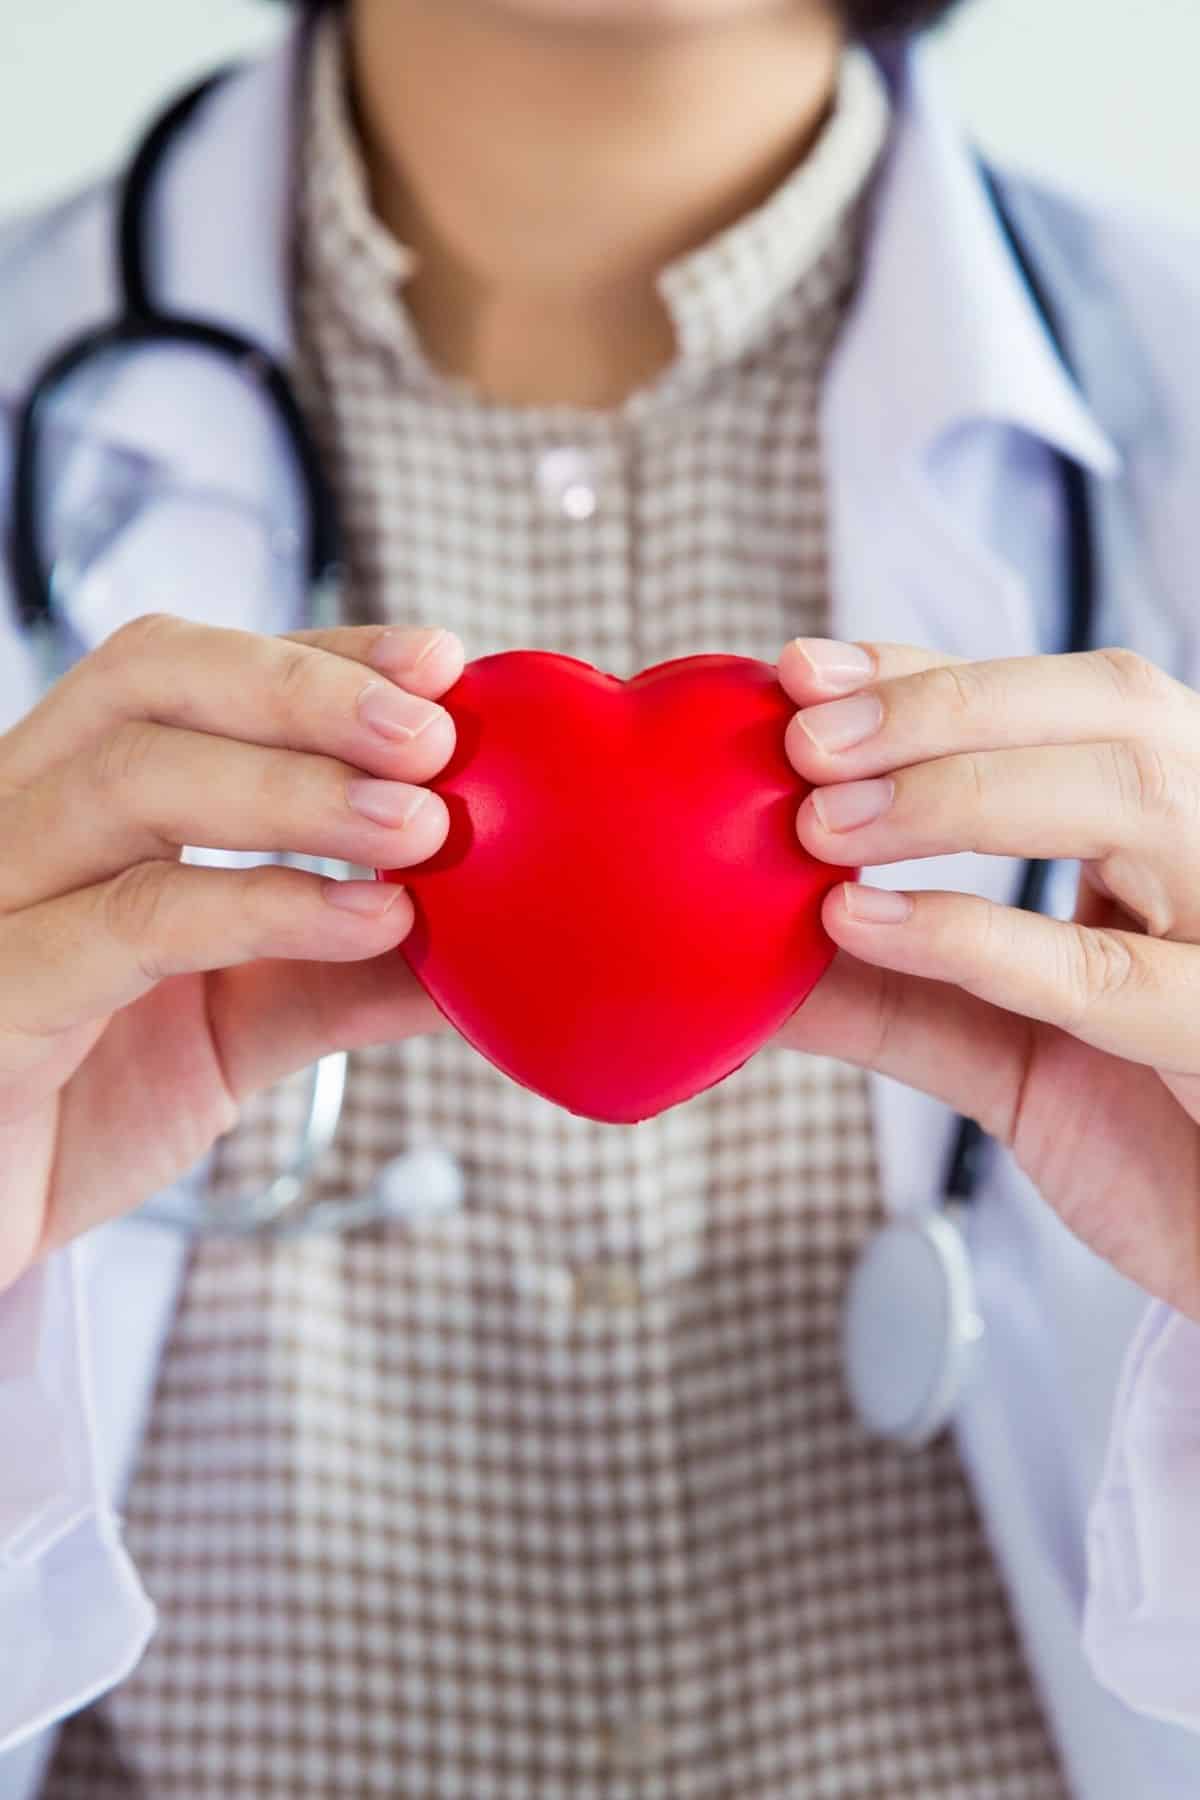 doctor holding a heart shaped item.